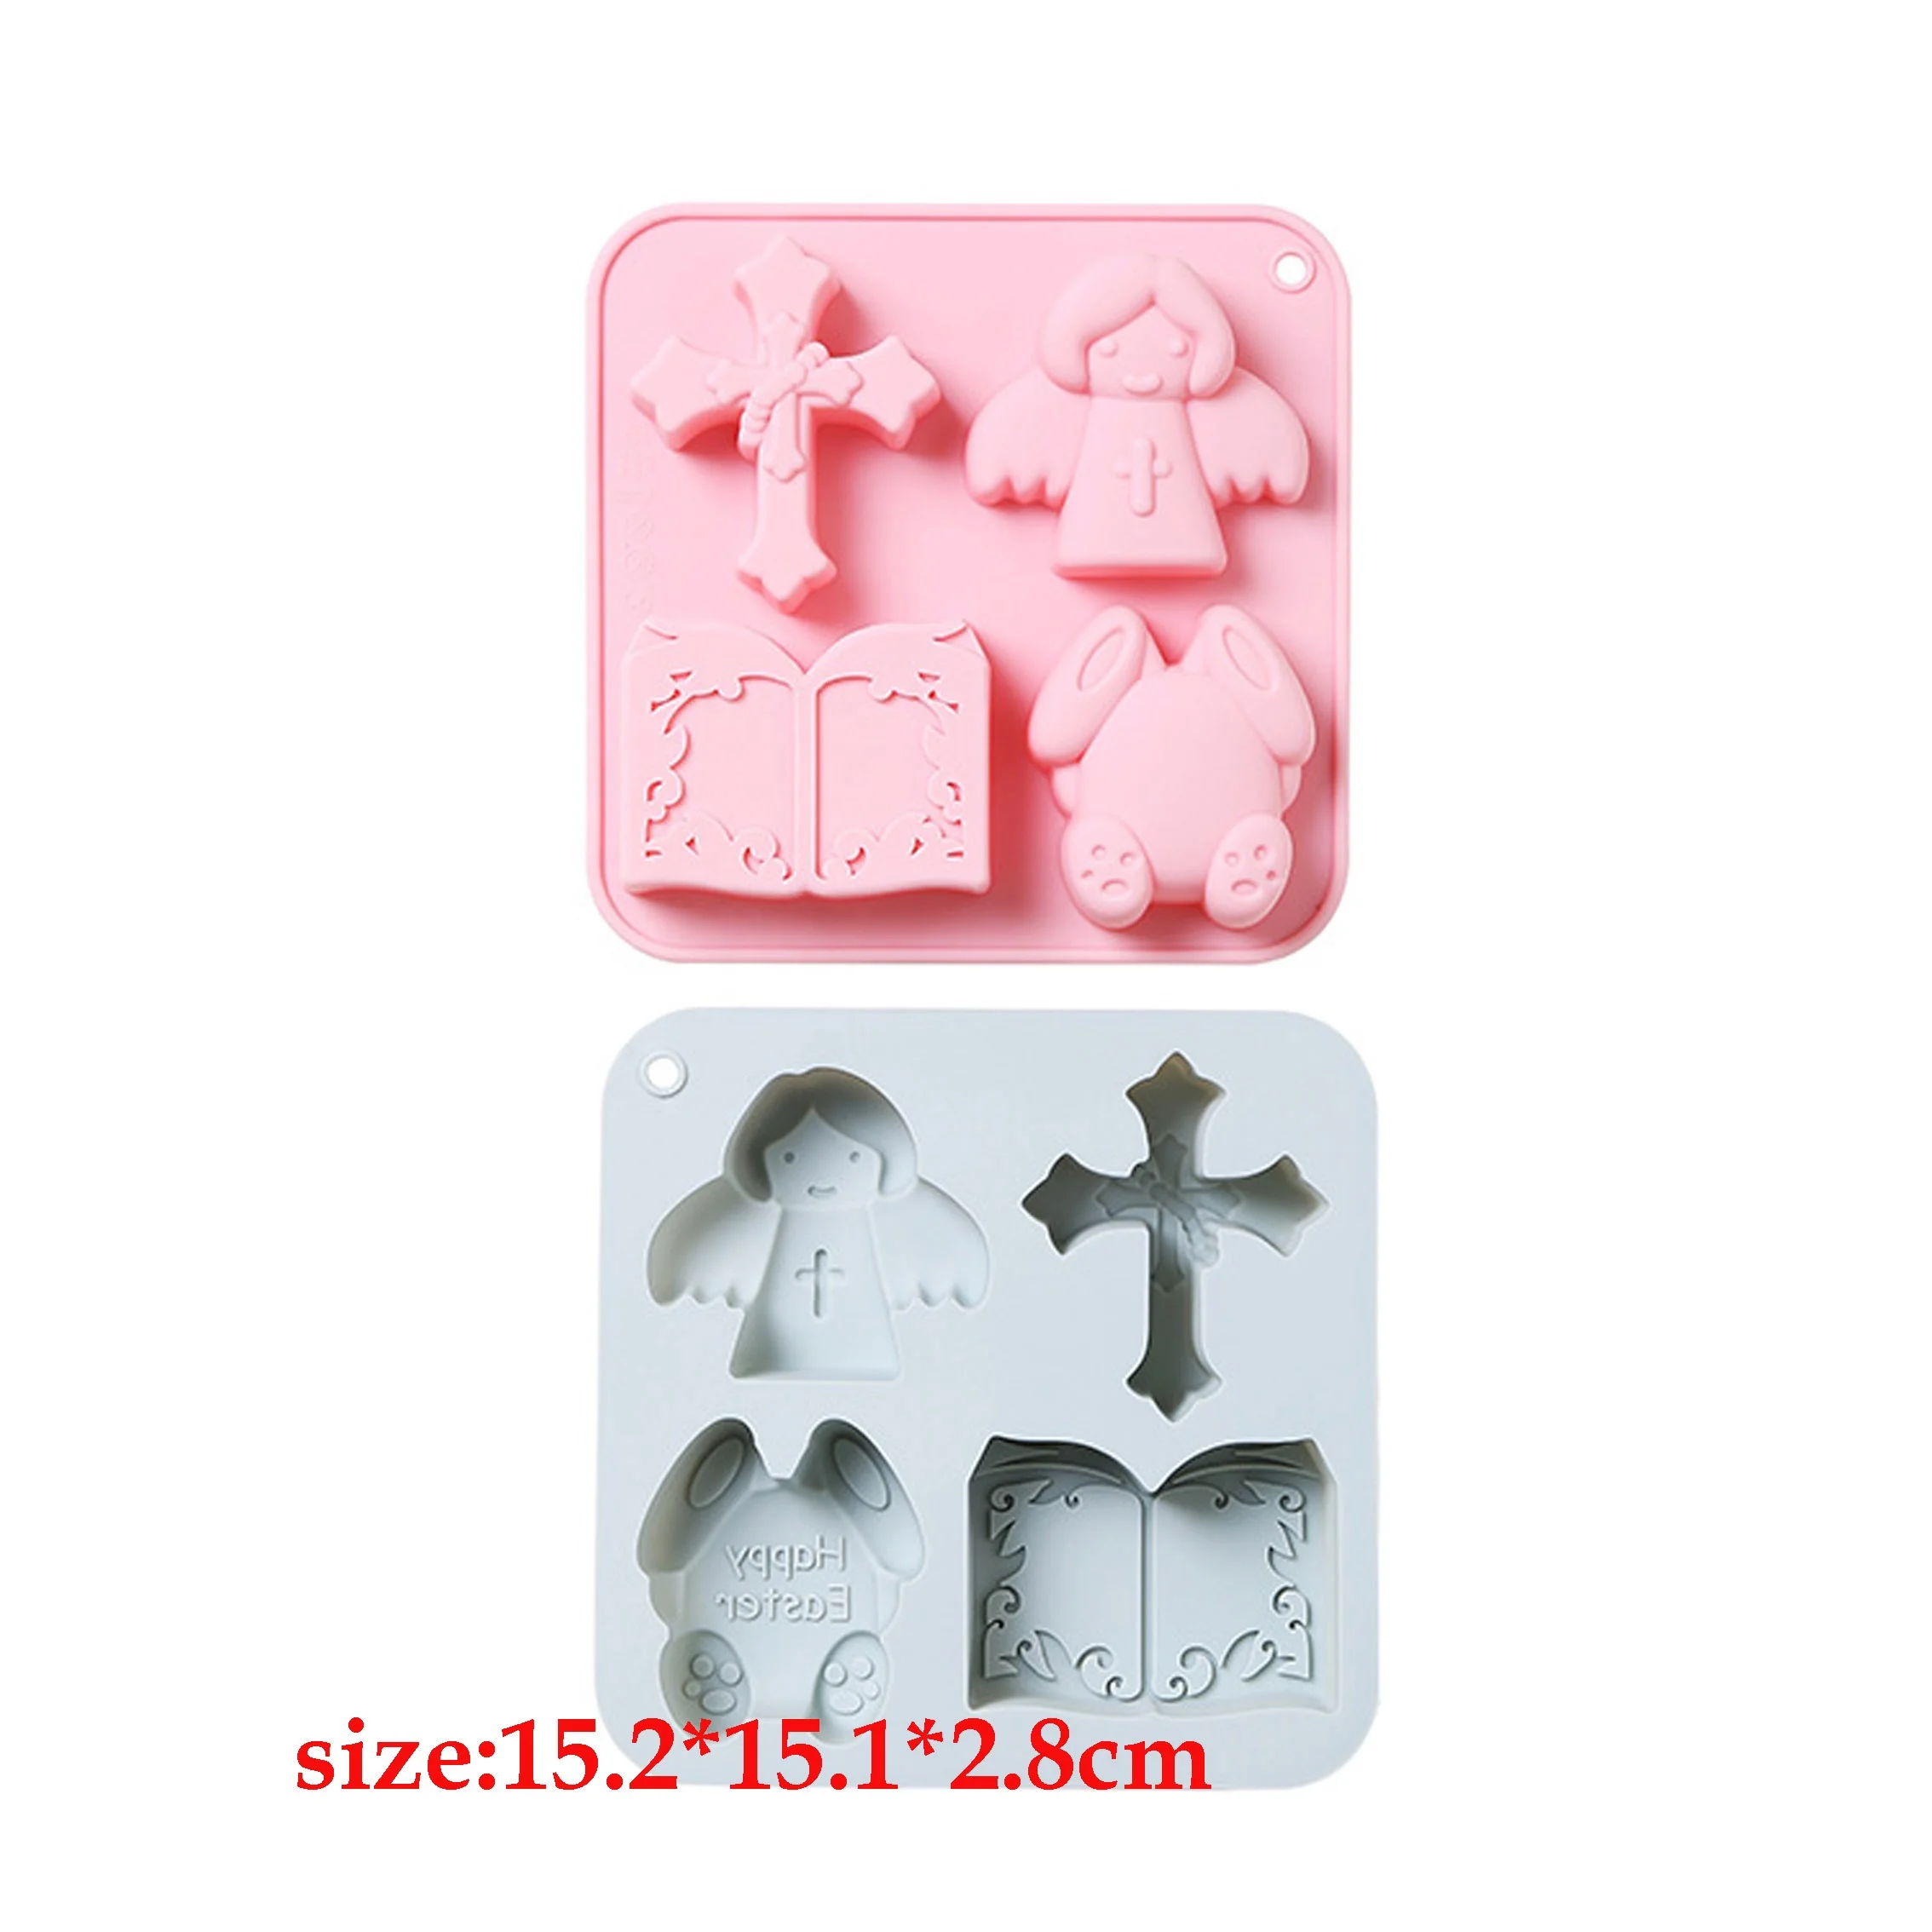 4 Even Easter Cross Angel Bible Shaped Silicone Cake Mold Soap Mold Easter Decoration Tools